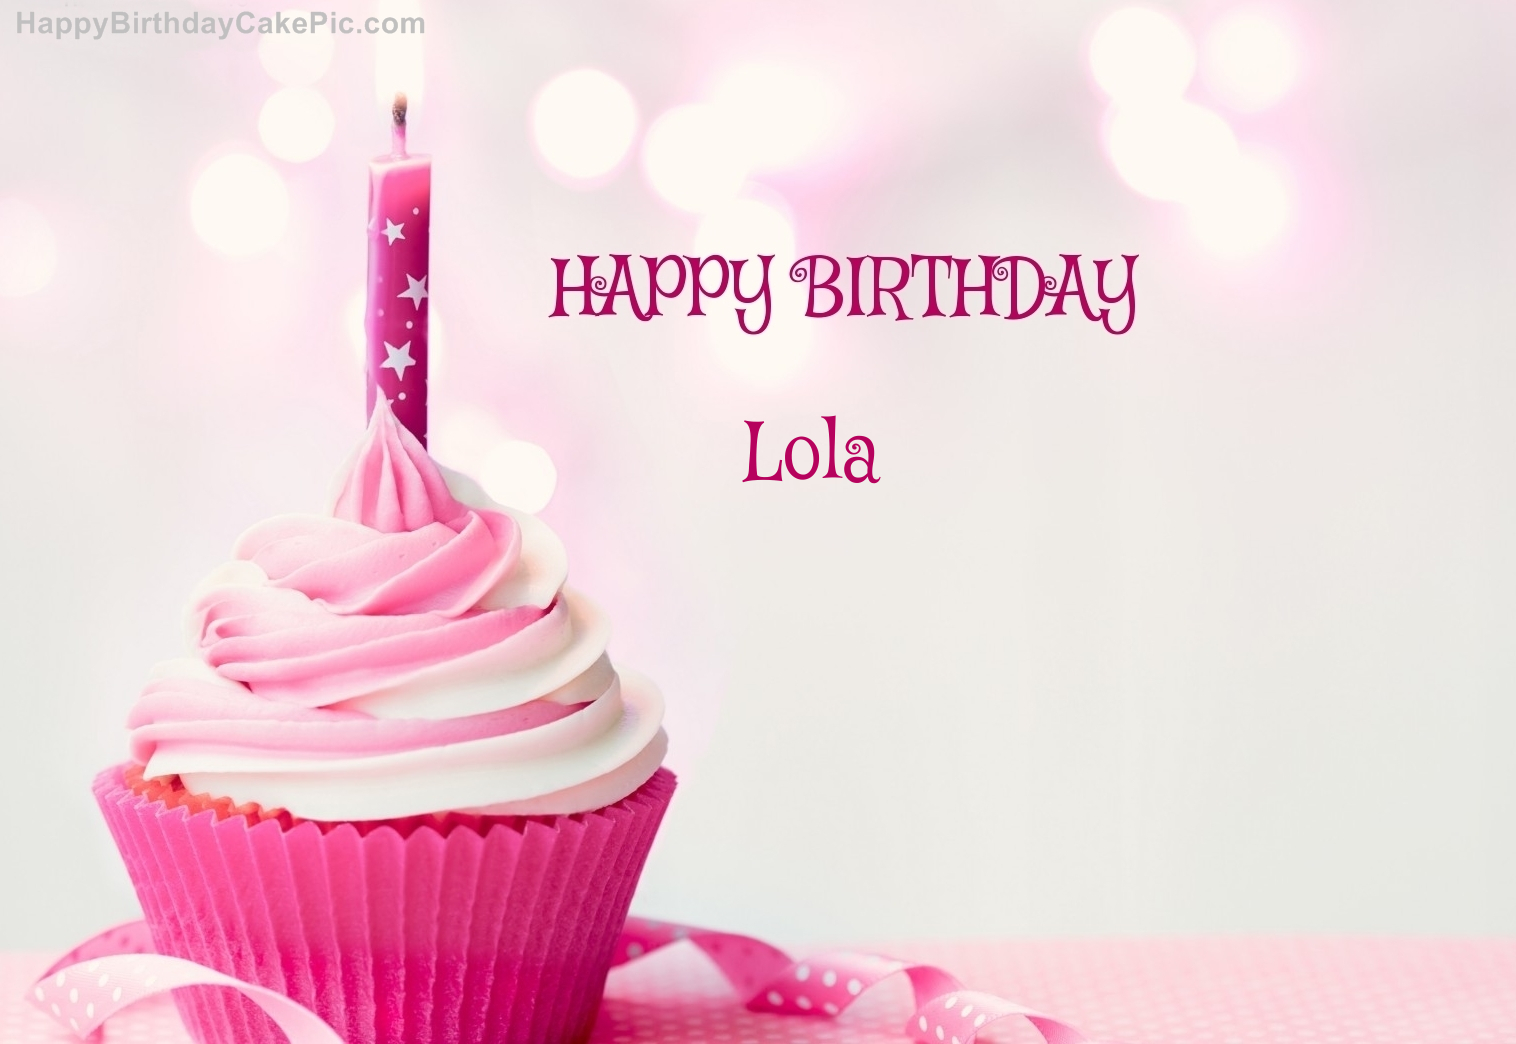 Image result for birthday cupcake lola pic